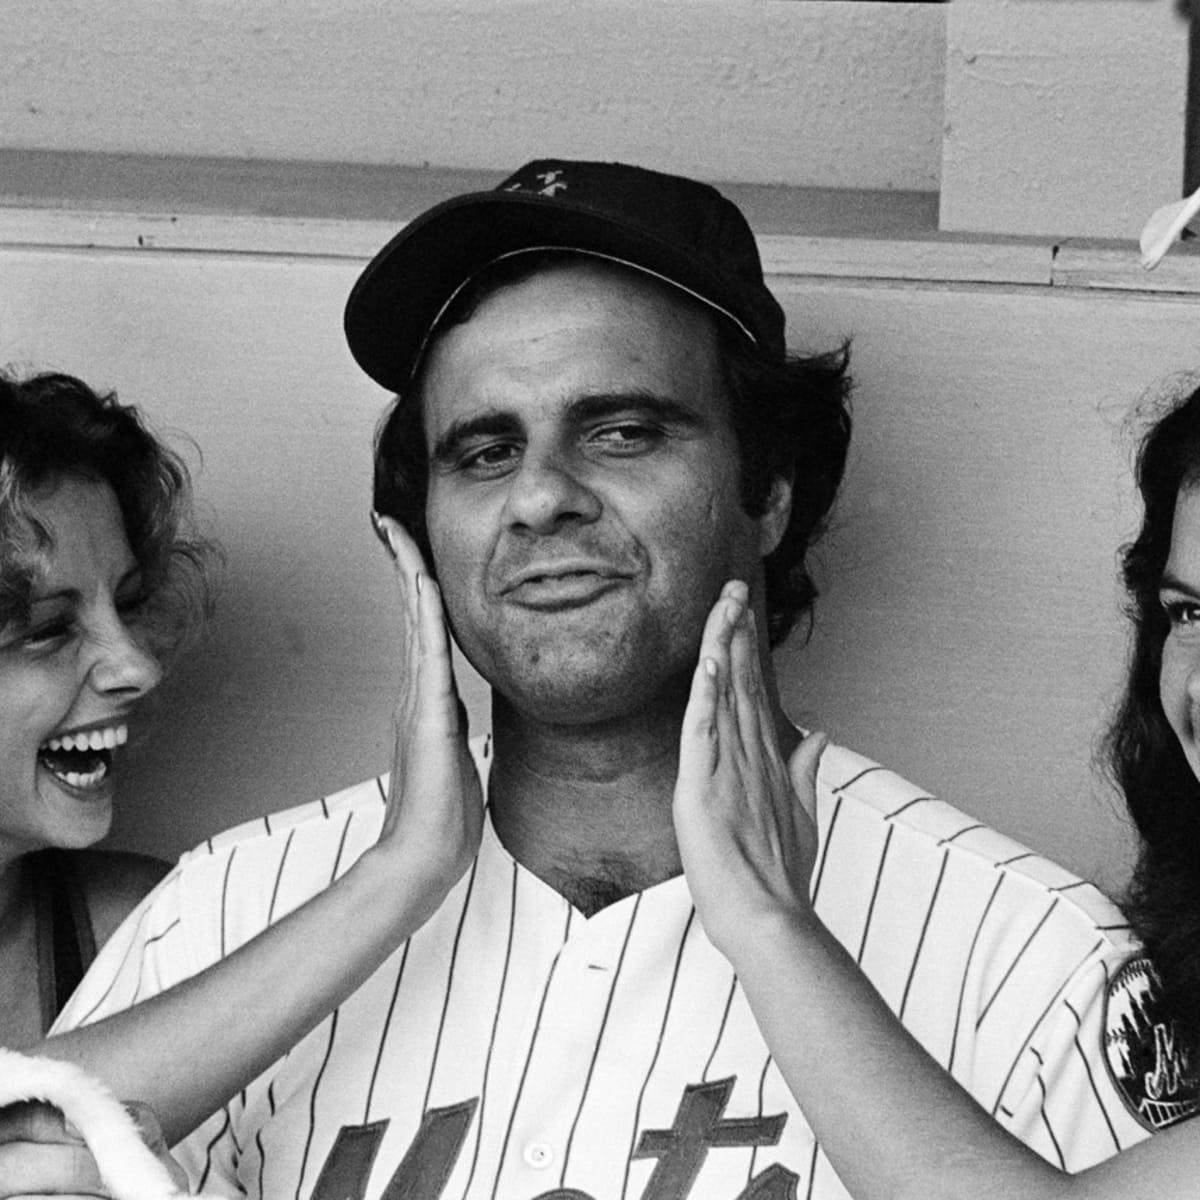 Joe Torre in the '70s - Sports Illustrated